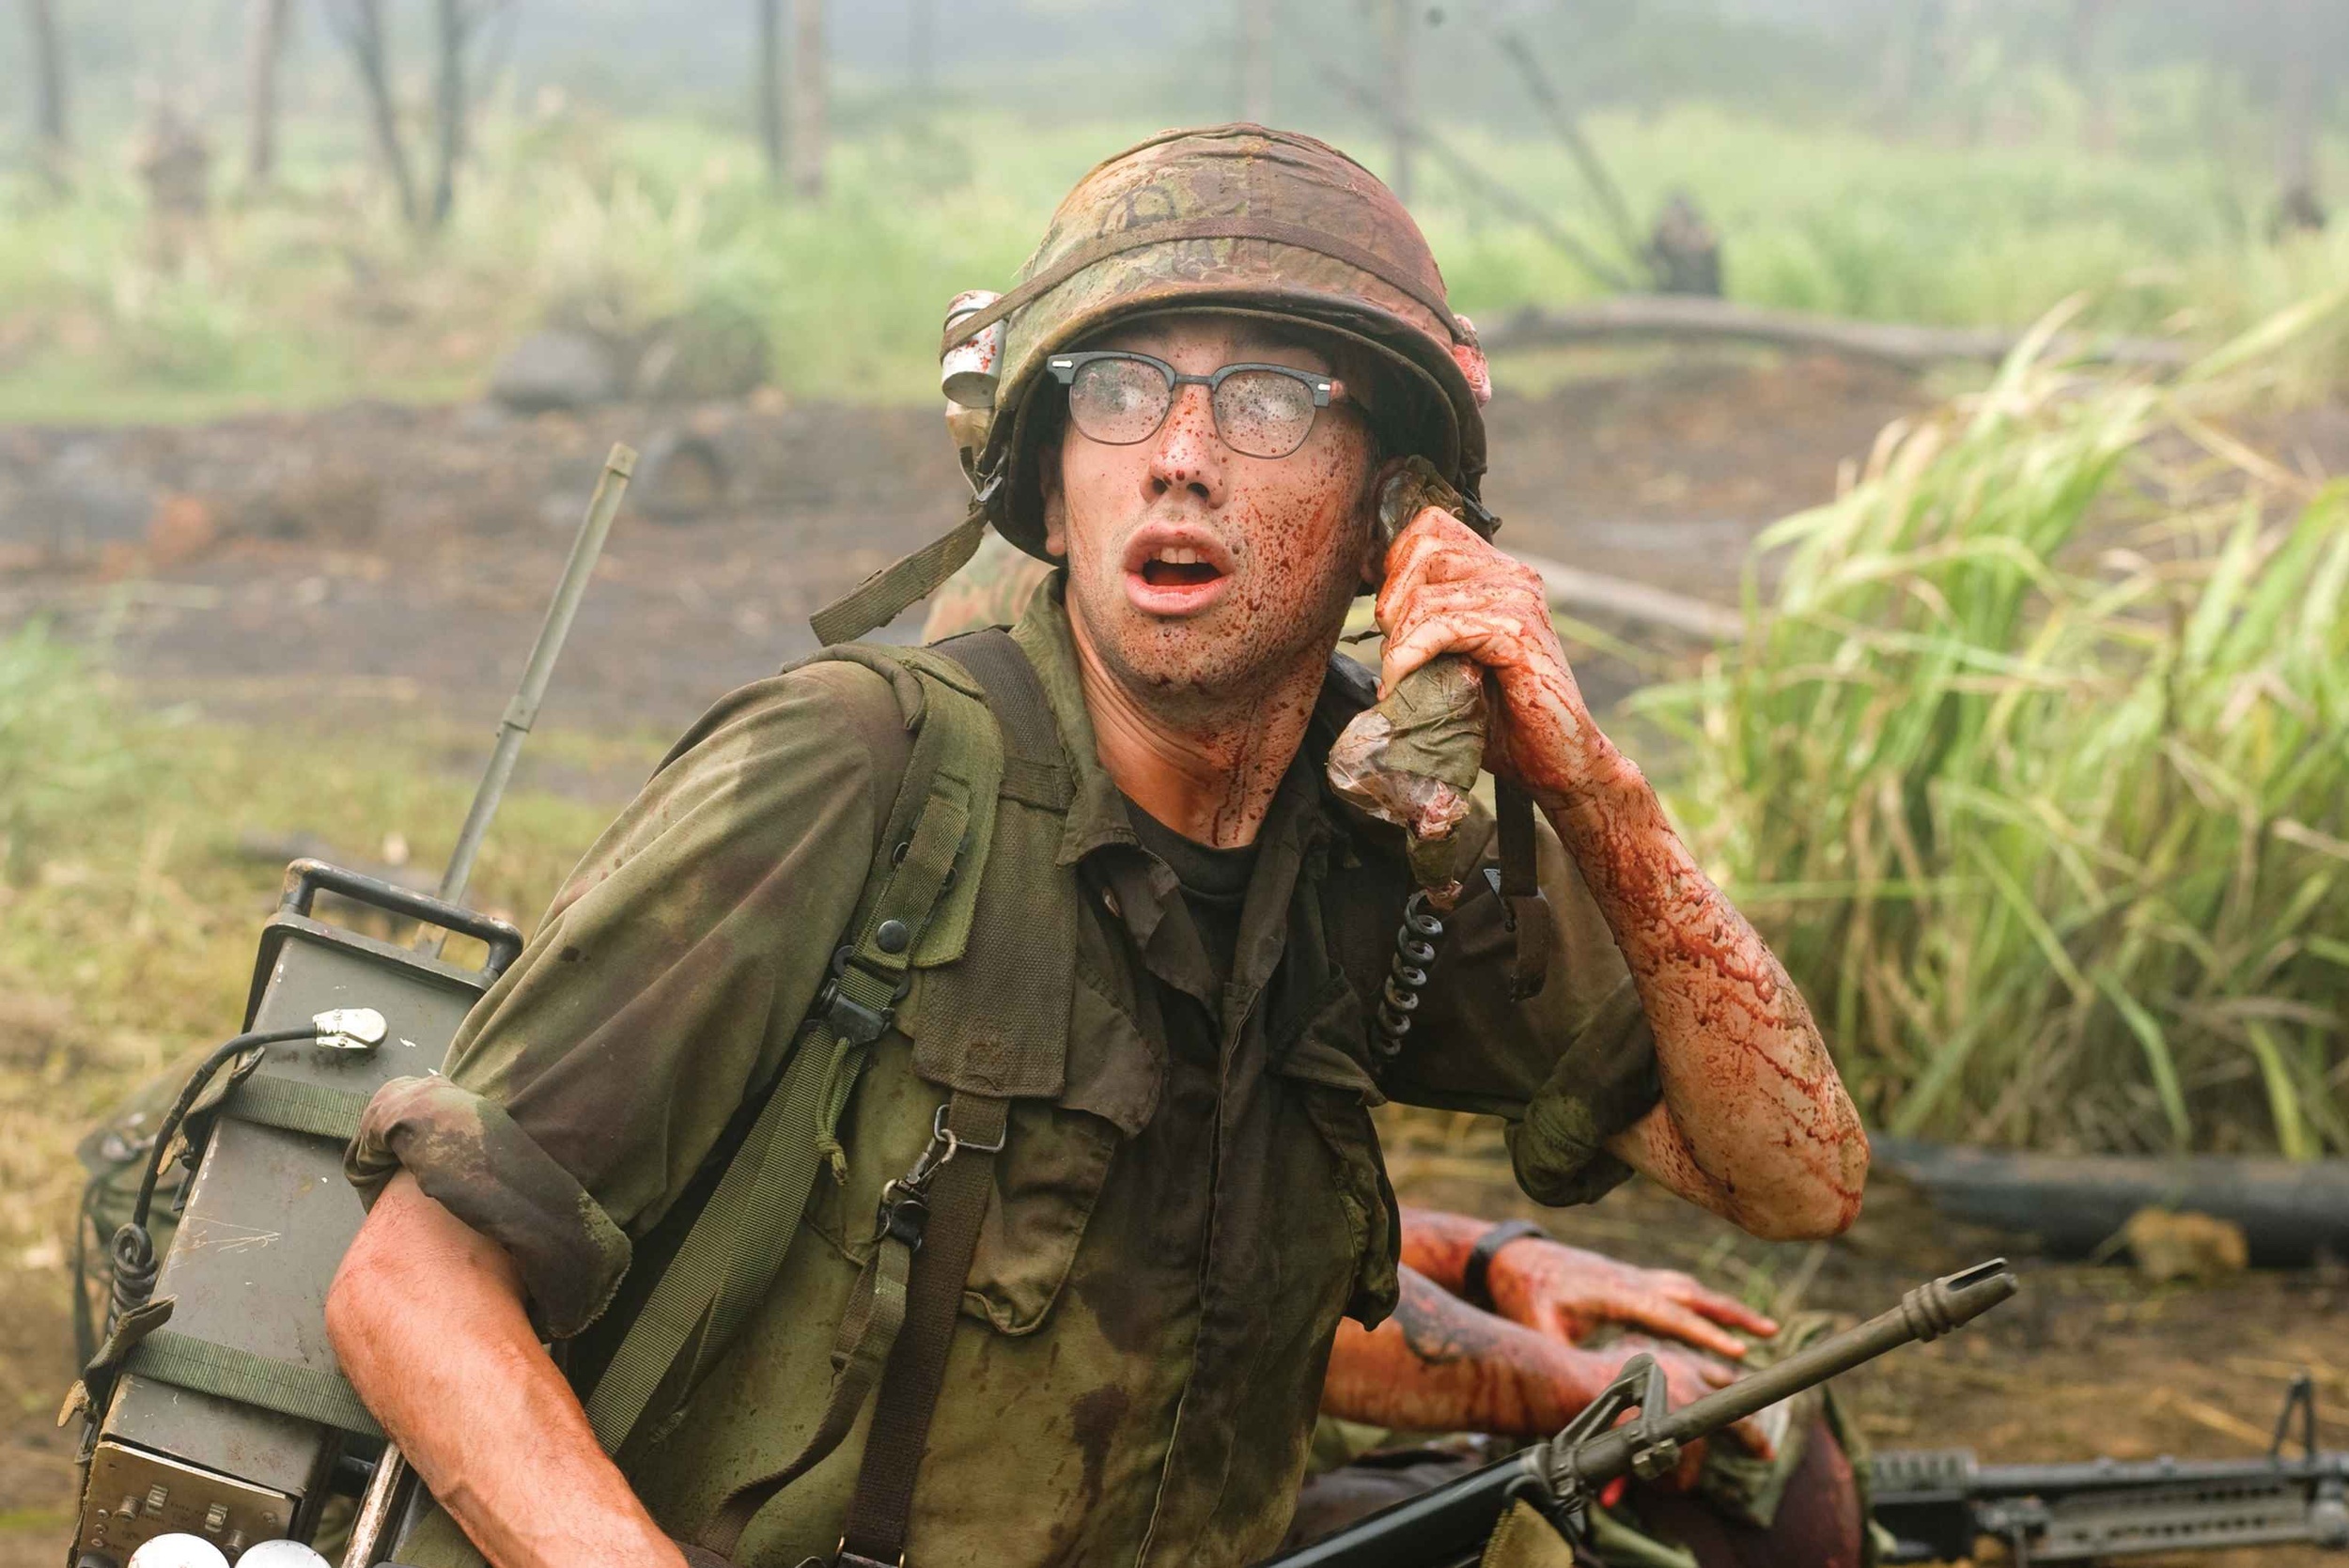 <p><em>Tropic Thunder</em> was moved from a July release date to a mid-August release date, considered a less robust time for films. It was also a time when R-rated comedies had been hitting. The move paid off.<em> Tropic Thunder</em> was the top movie at the domestic box office for three weeks in a row. The film made $195.7 million worldwide from a budget of $92 million.</p><p><a href='https://www.msn.com/en-us/community/channel/vid-cj9pqbr0vn9in2b6ddcd8sfgpfq6x6utp44fssrv6mc2gtybw0us'>Follow us on MSN to see more of our exclusive entertainment content.</a></p>